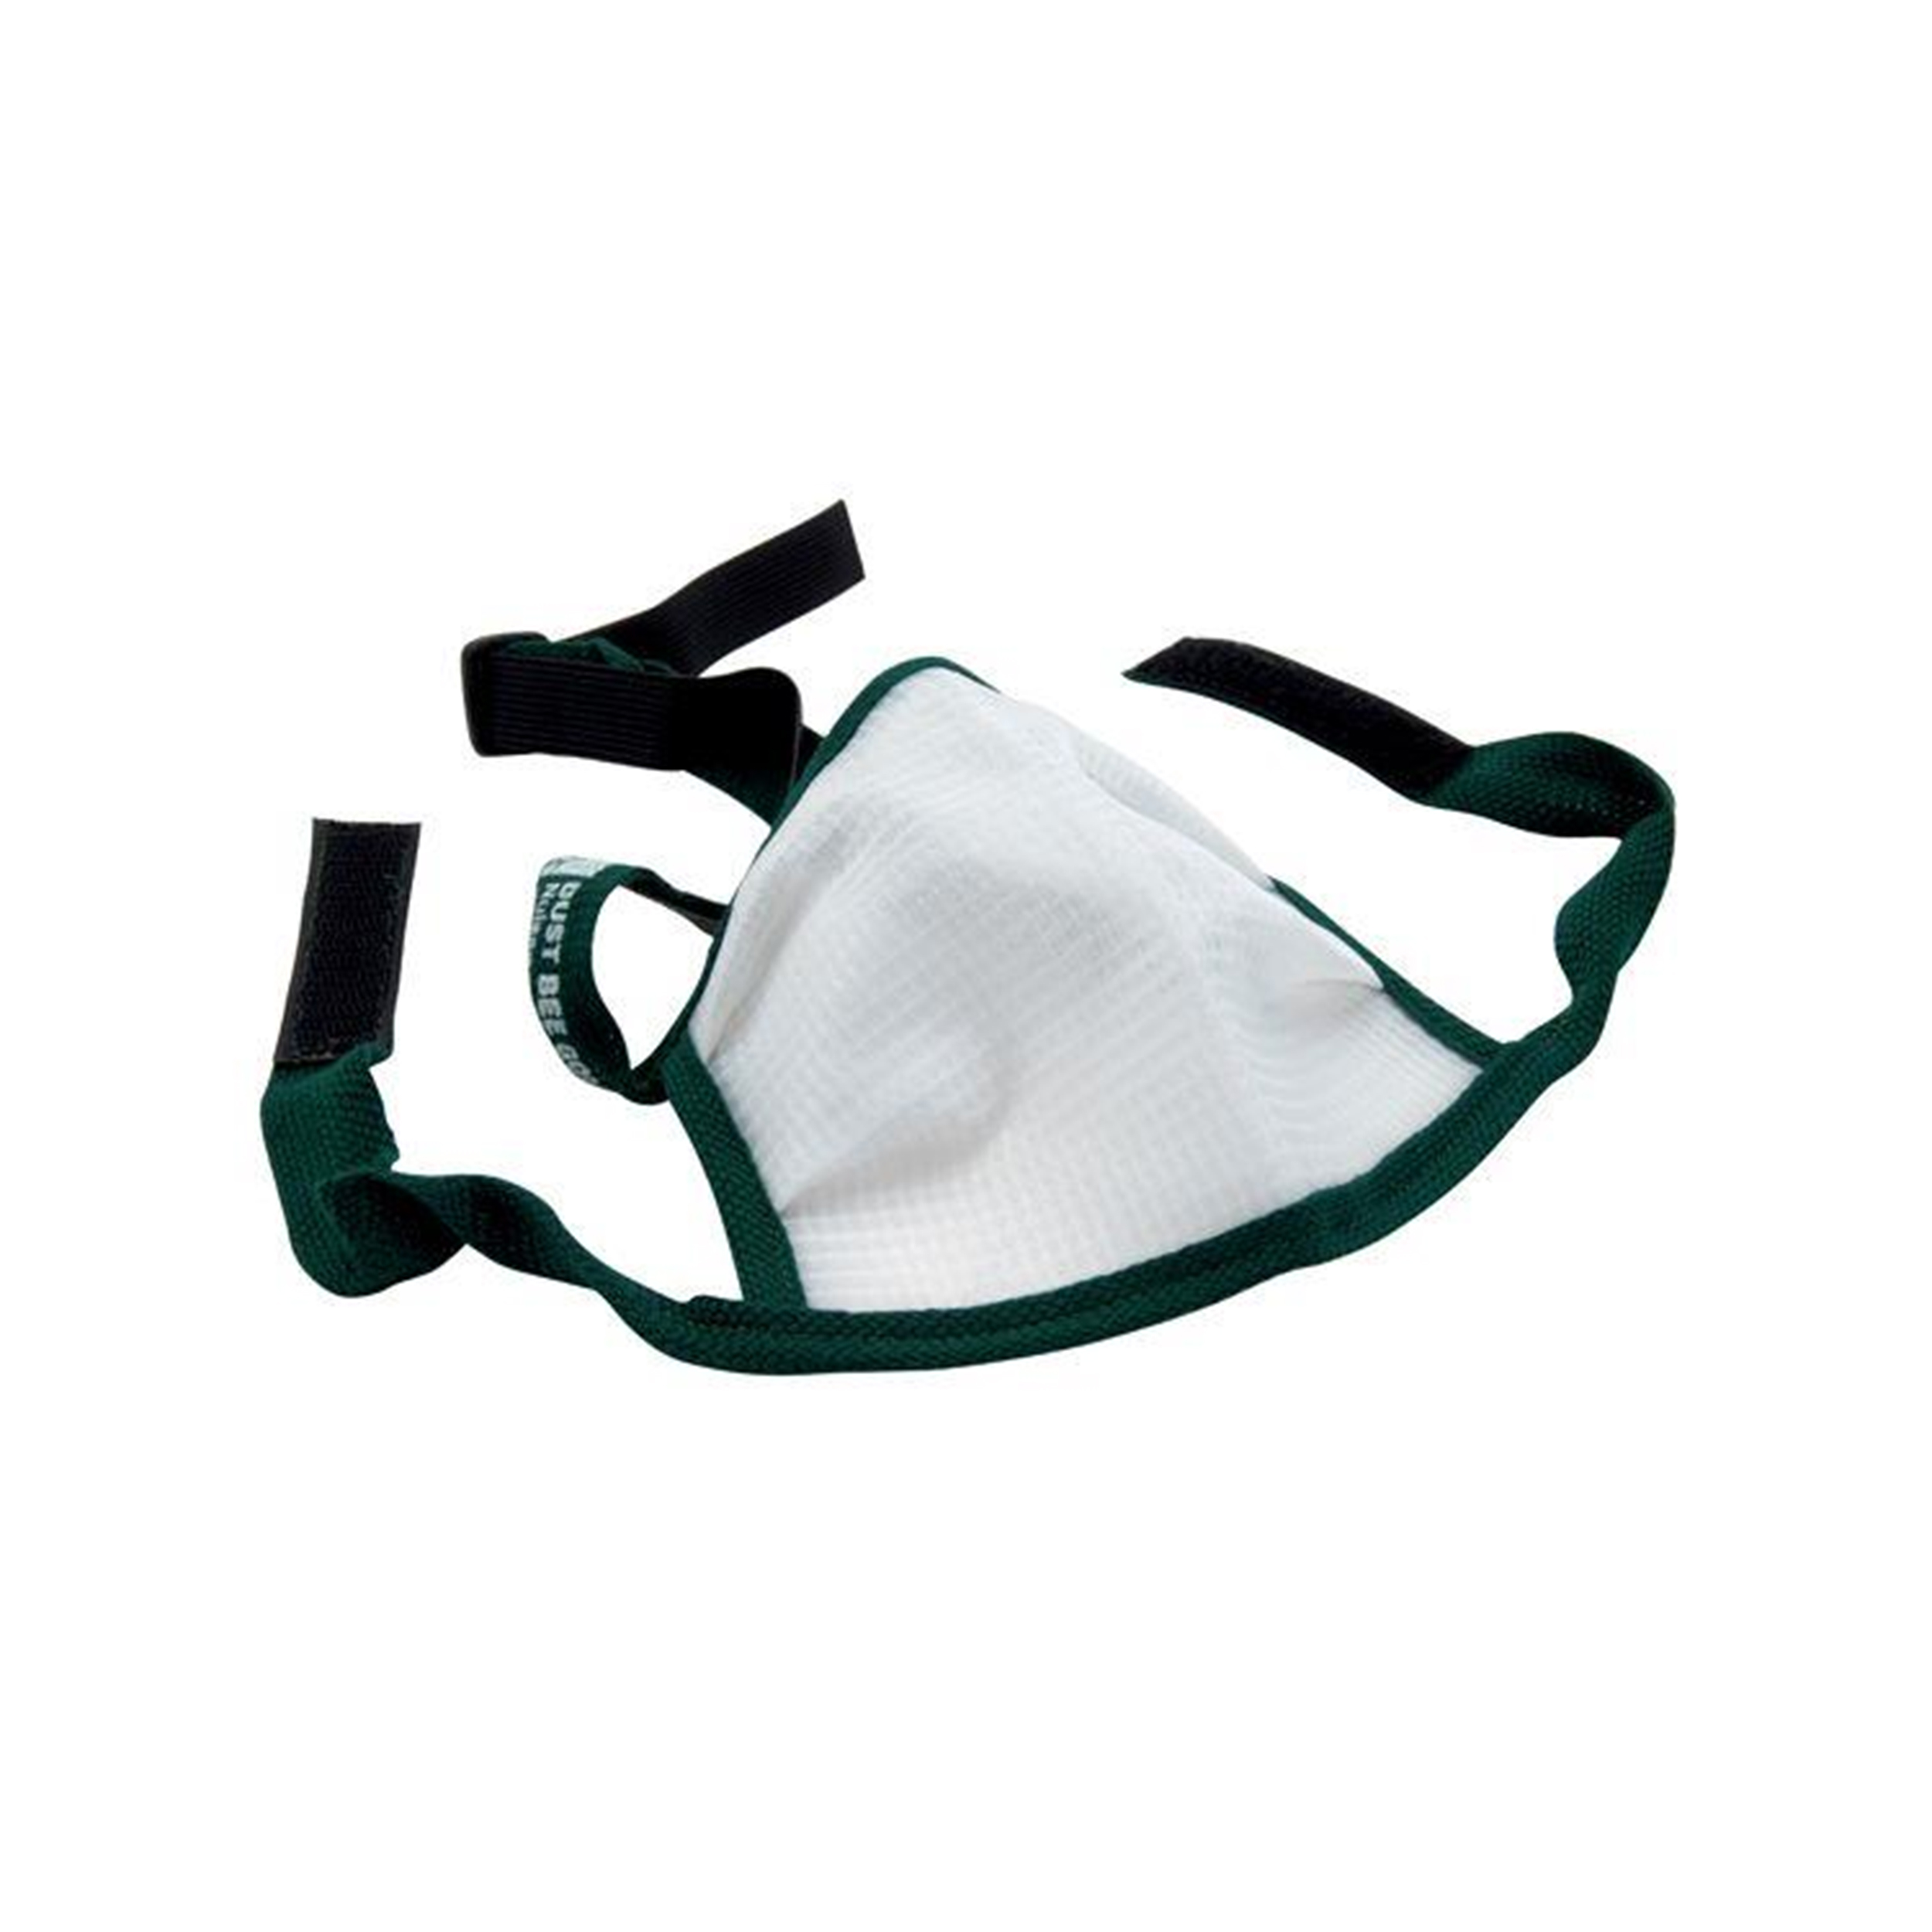 X-large Dust Bee Gone Mask - Green Edging